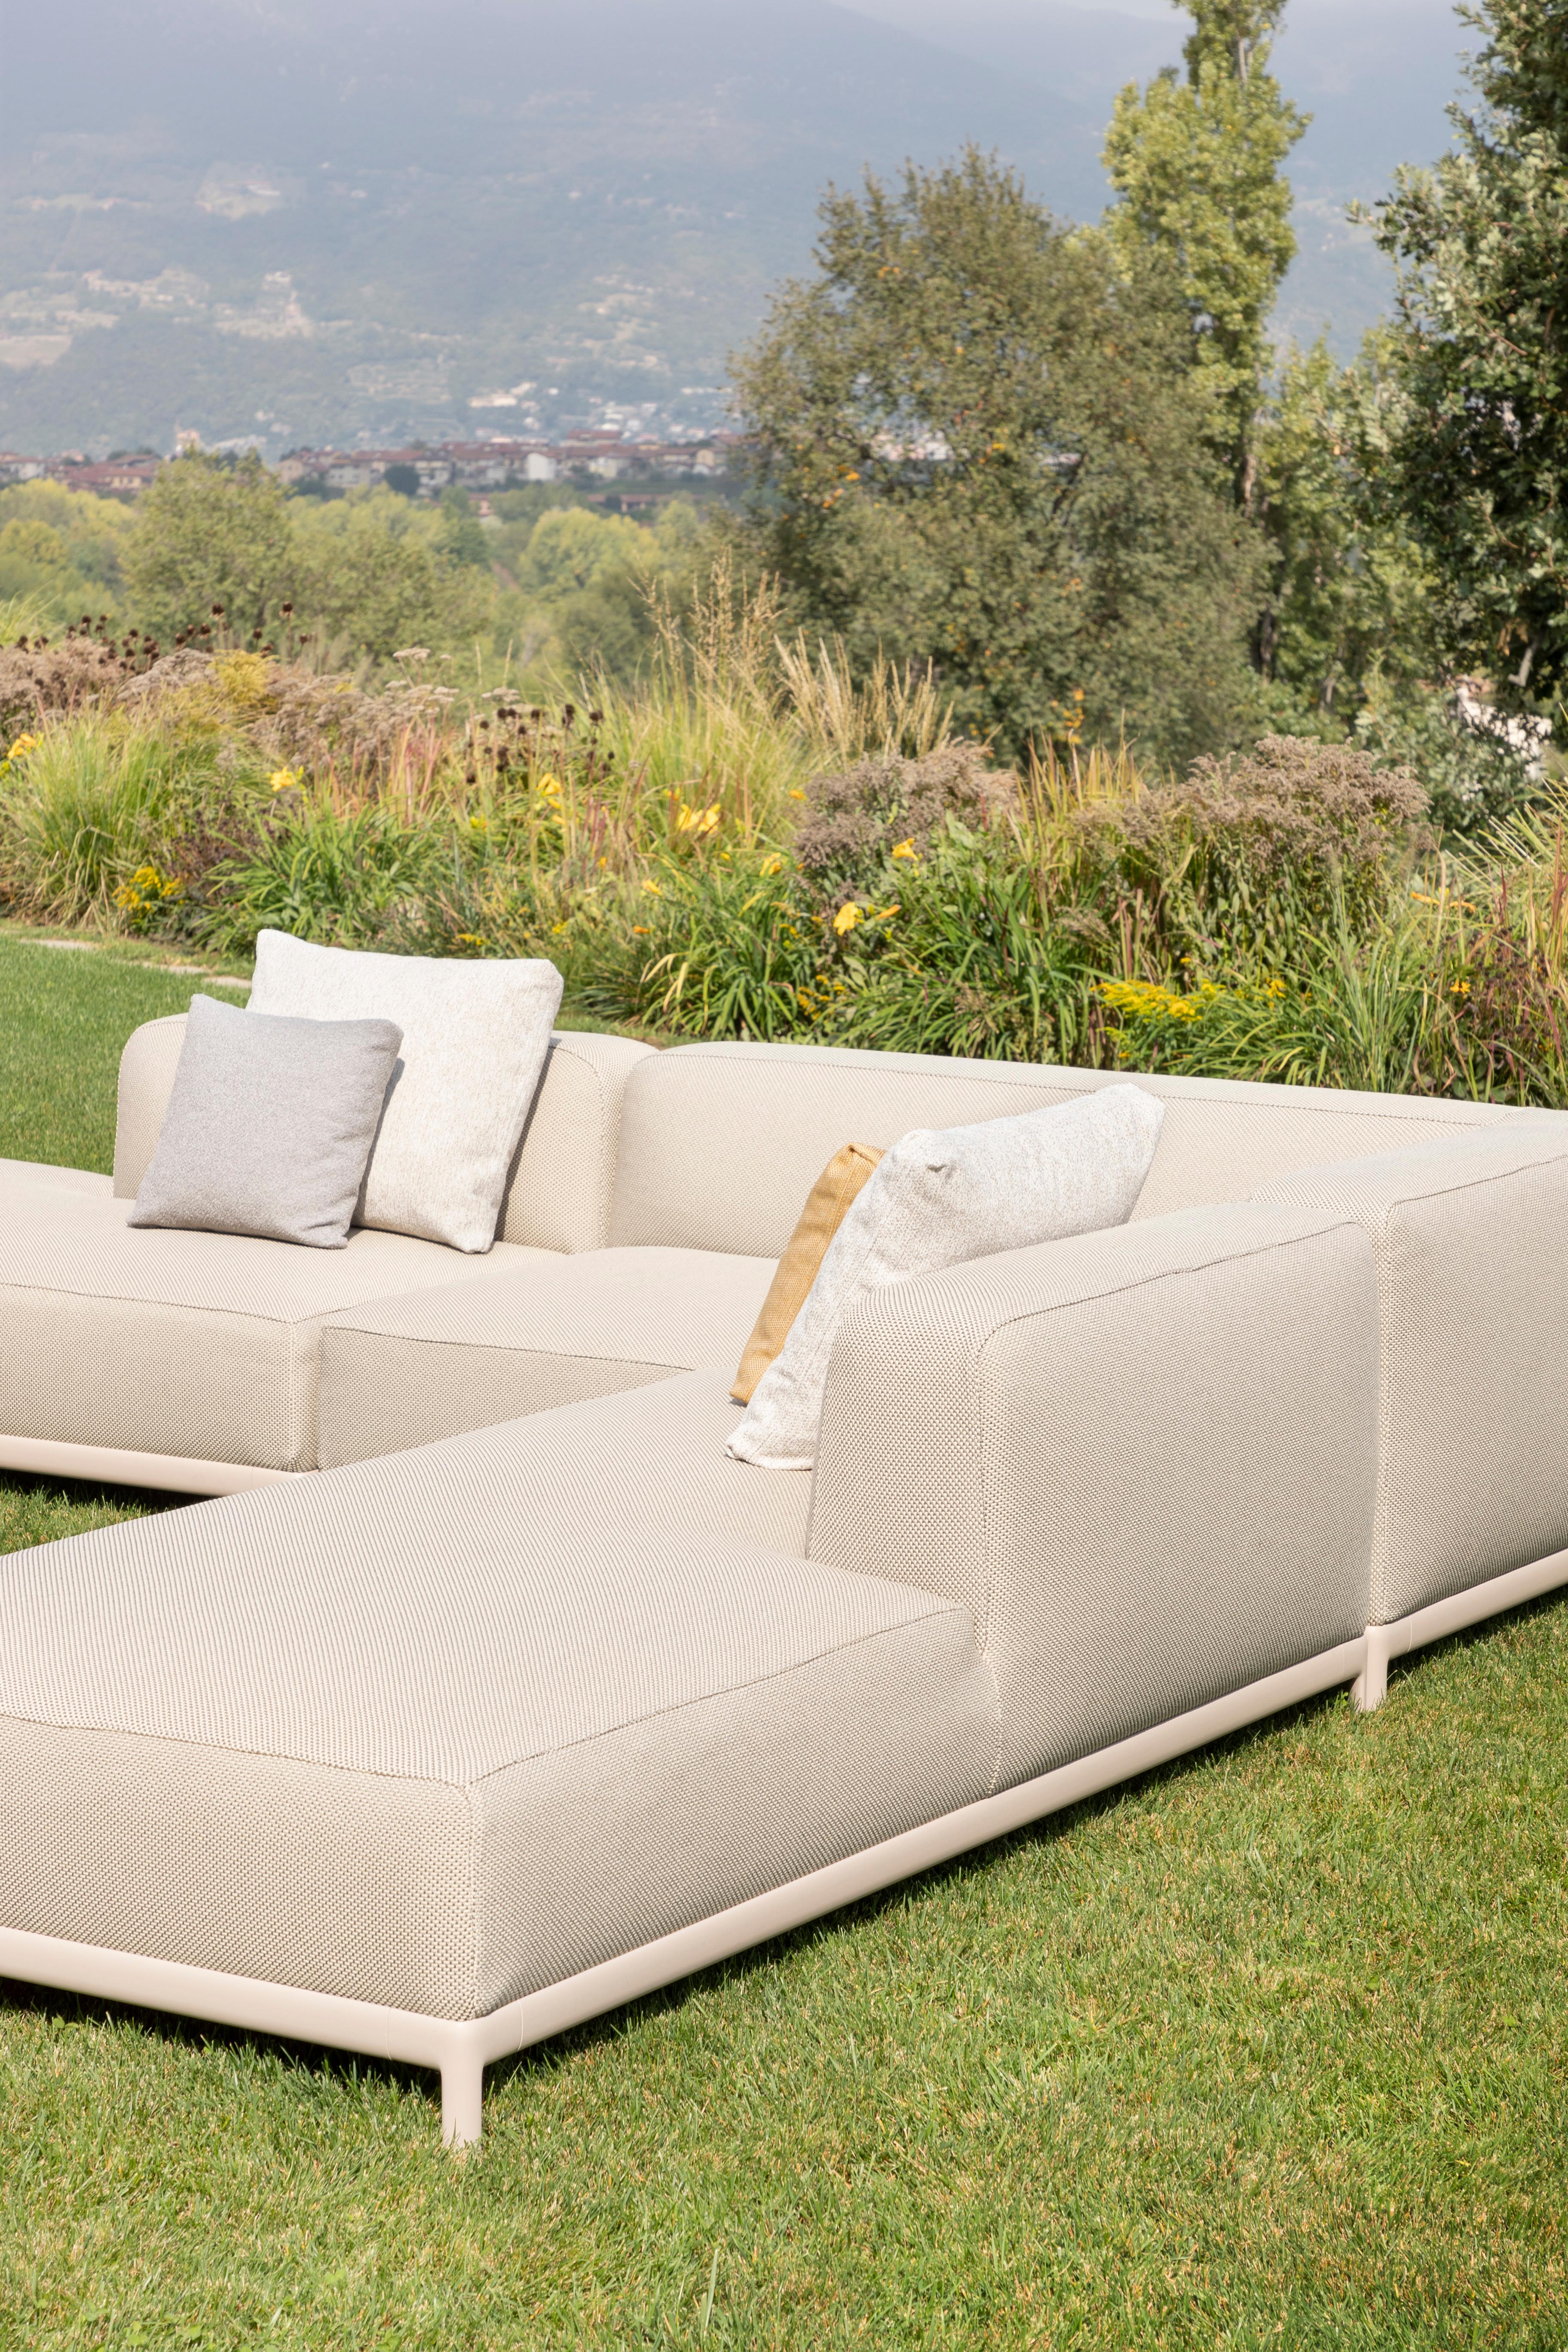 Alias P64 AluZen Outdoor SX Soft Angular Sofa in Upholstery with Aluminium Frame by Ludovica & Roberto Palomba

Modular corner element for outdoor use with structure in lacquered aluminium.Seat, back and armrest with removable cover in fabric or